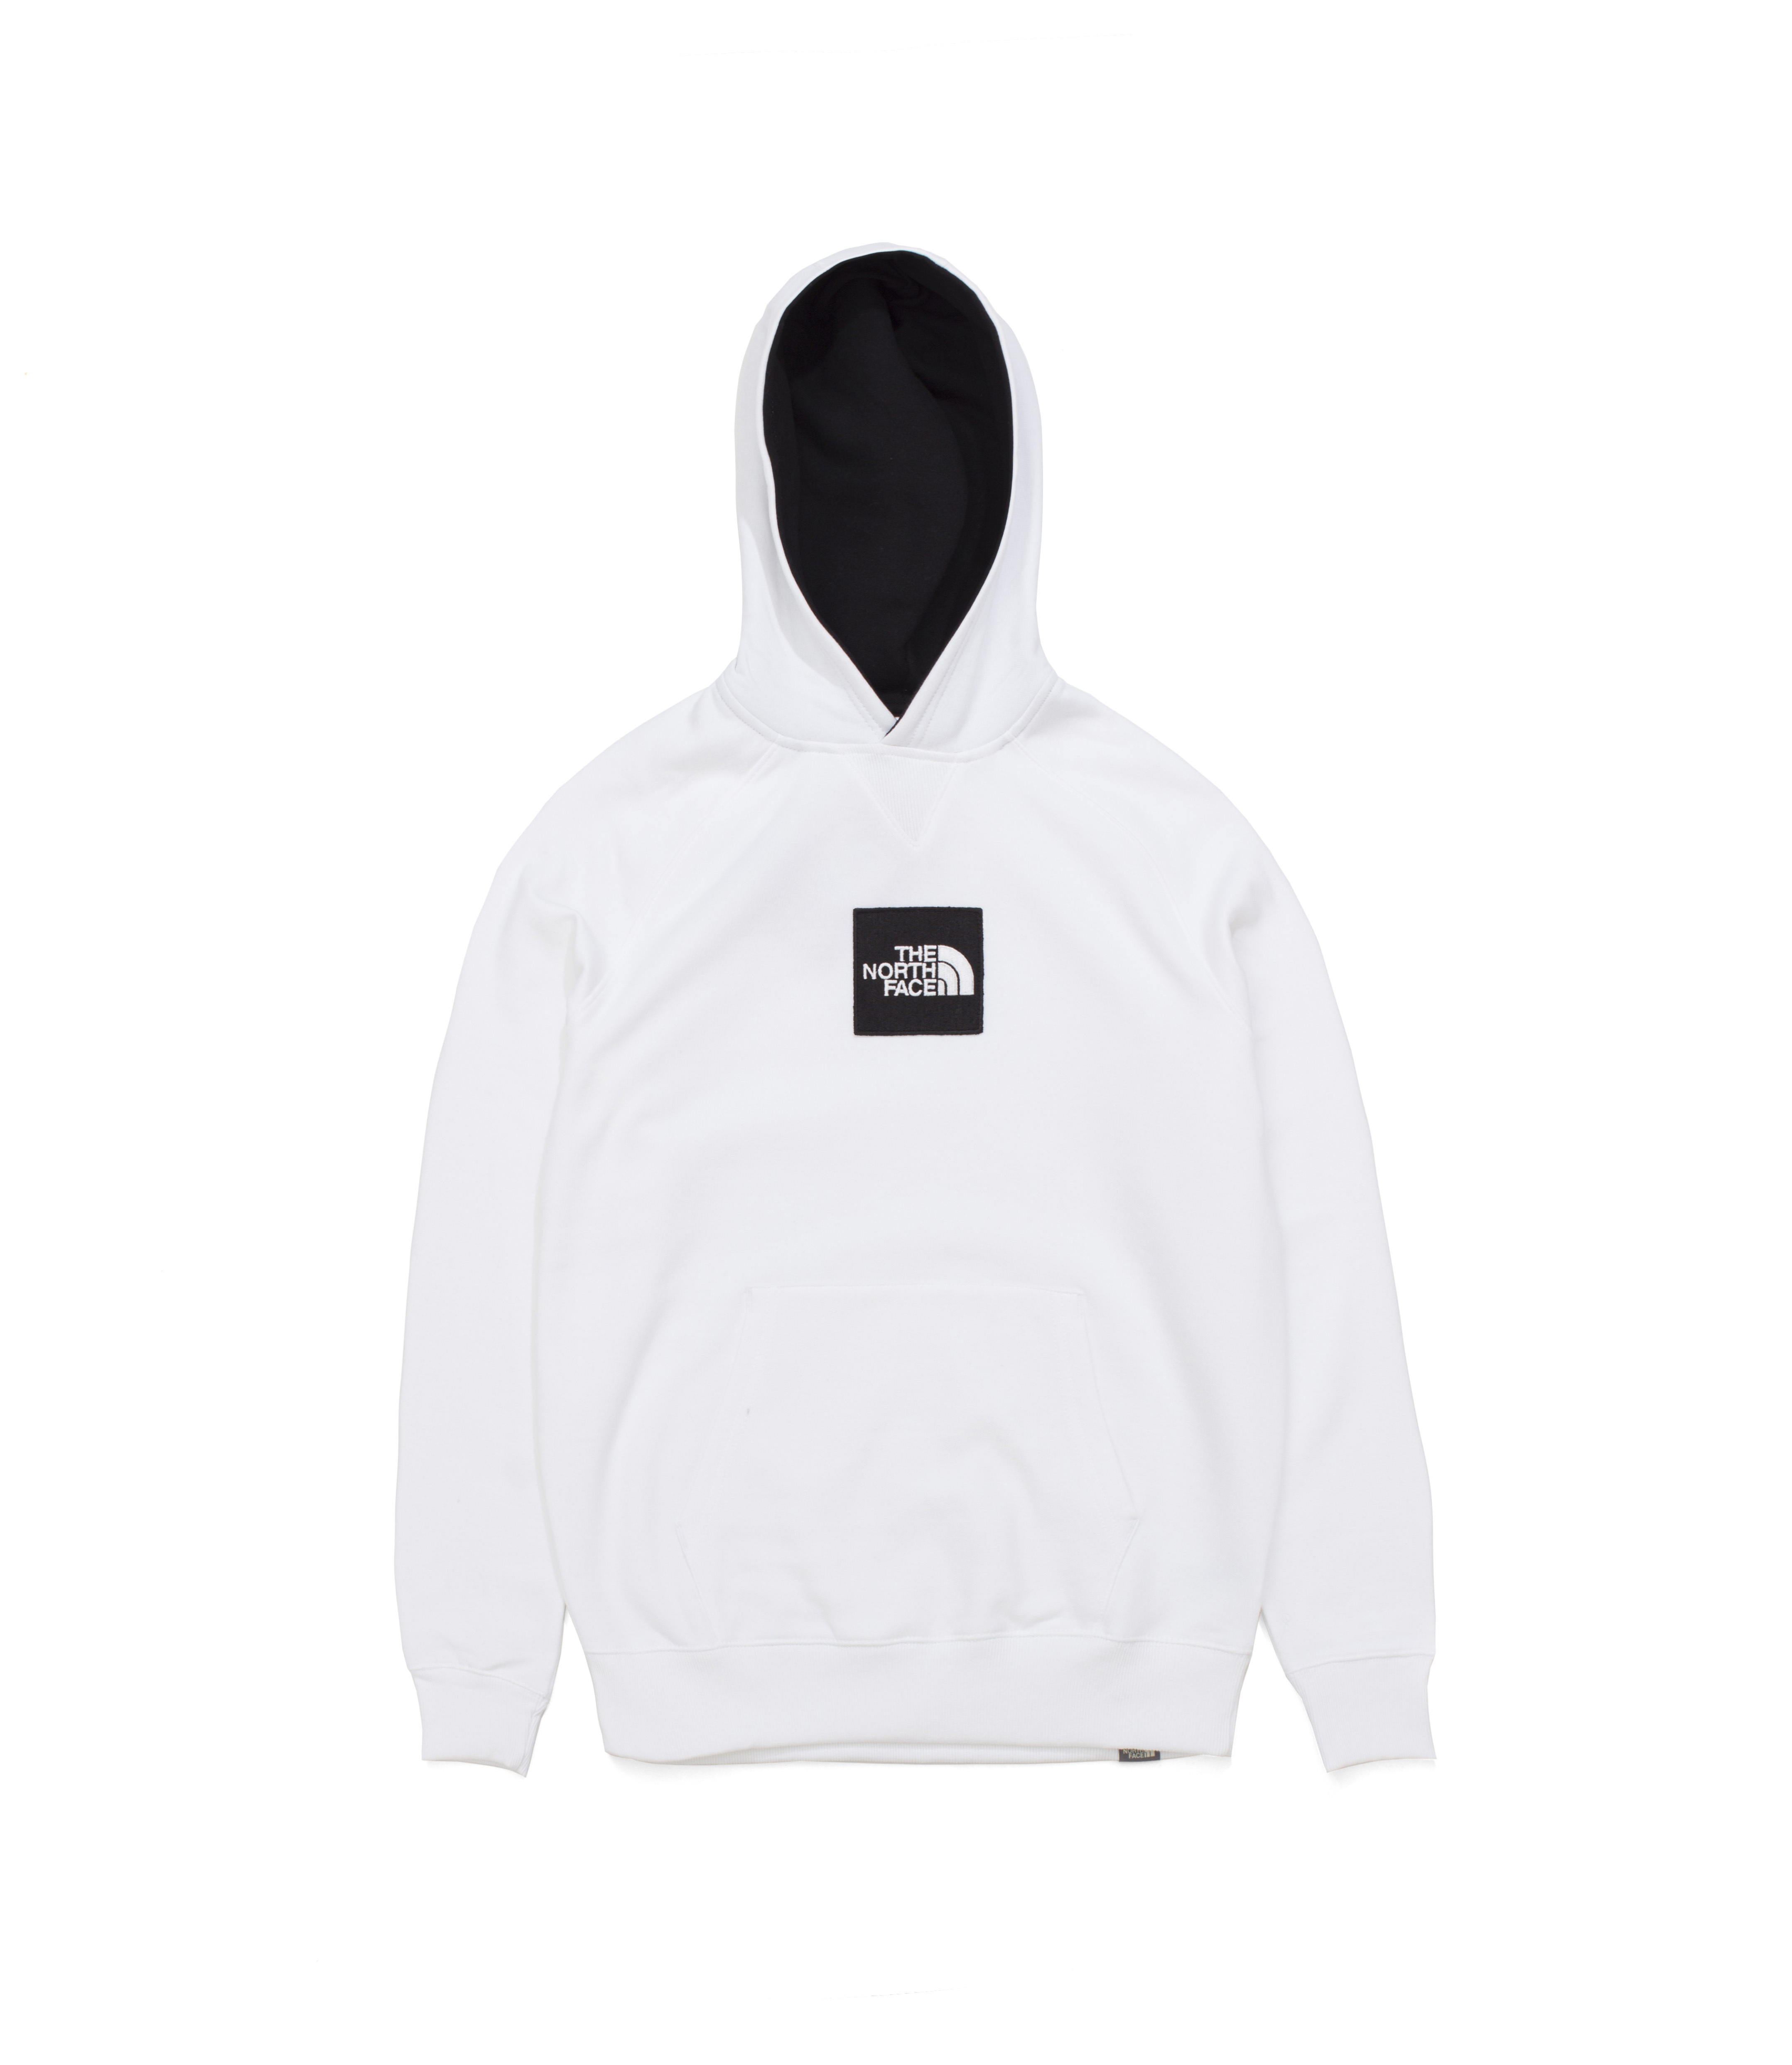 Shop The North Face Fine Hoodie TNF White at itk online store